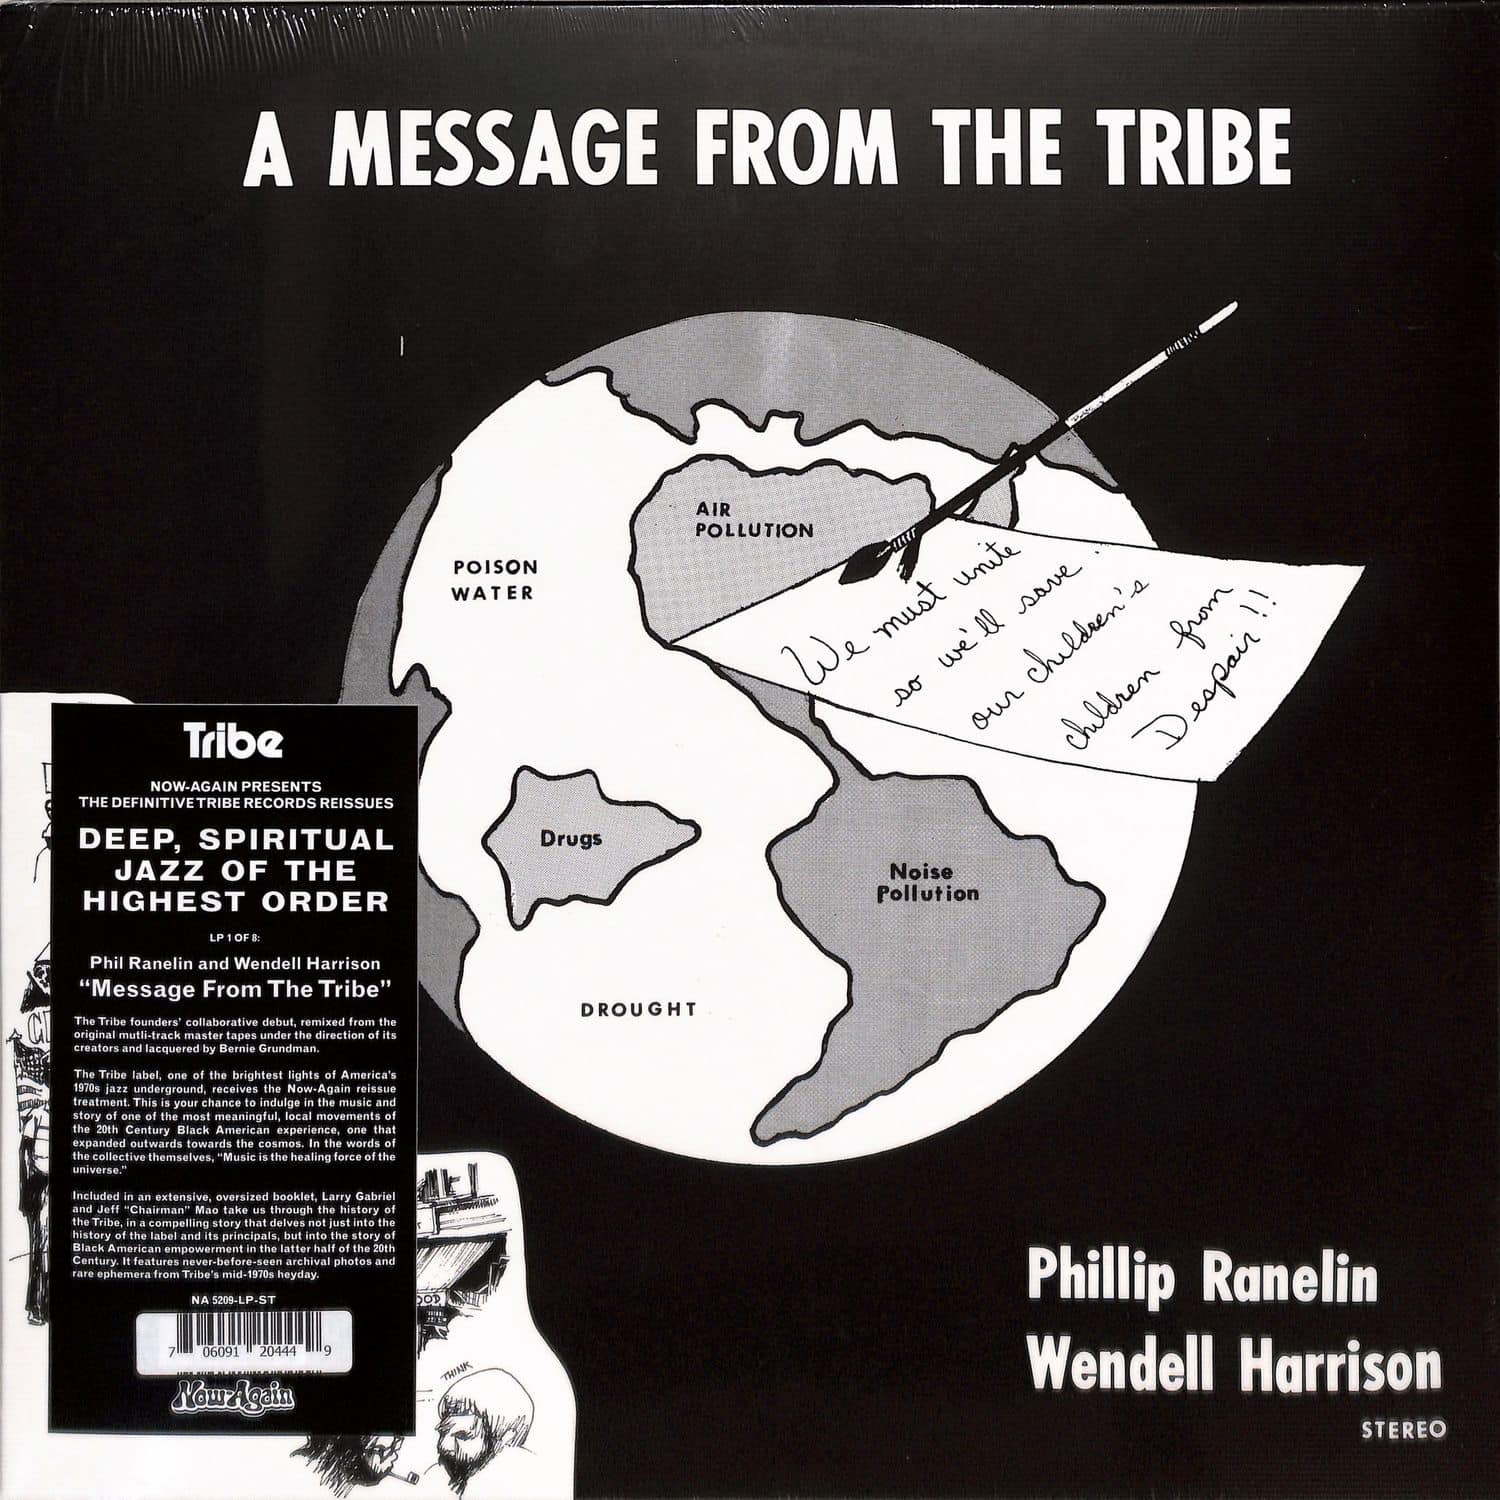 Phil Ranelin & Wendell Harrison - MESSAGE FROM THE TRIBE 